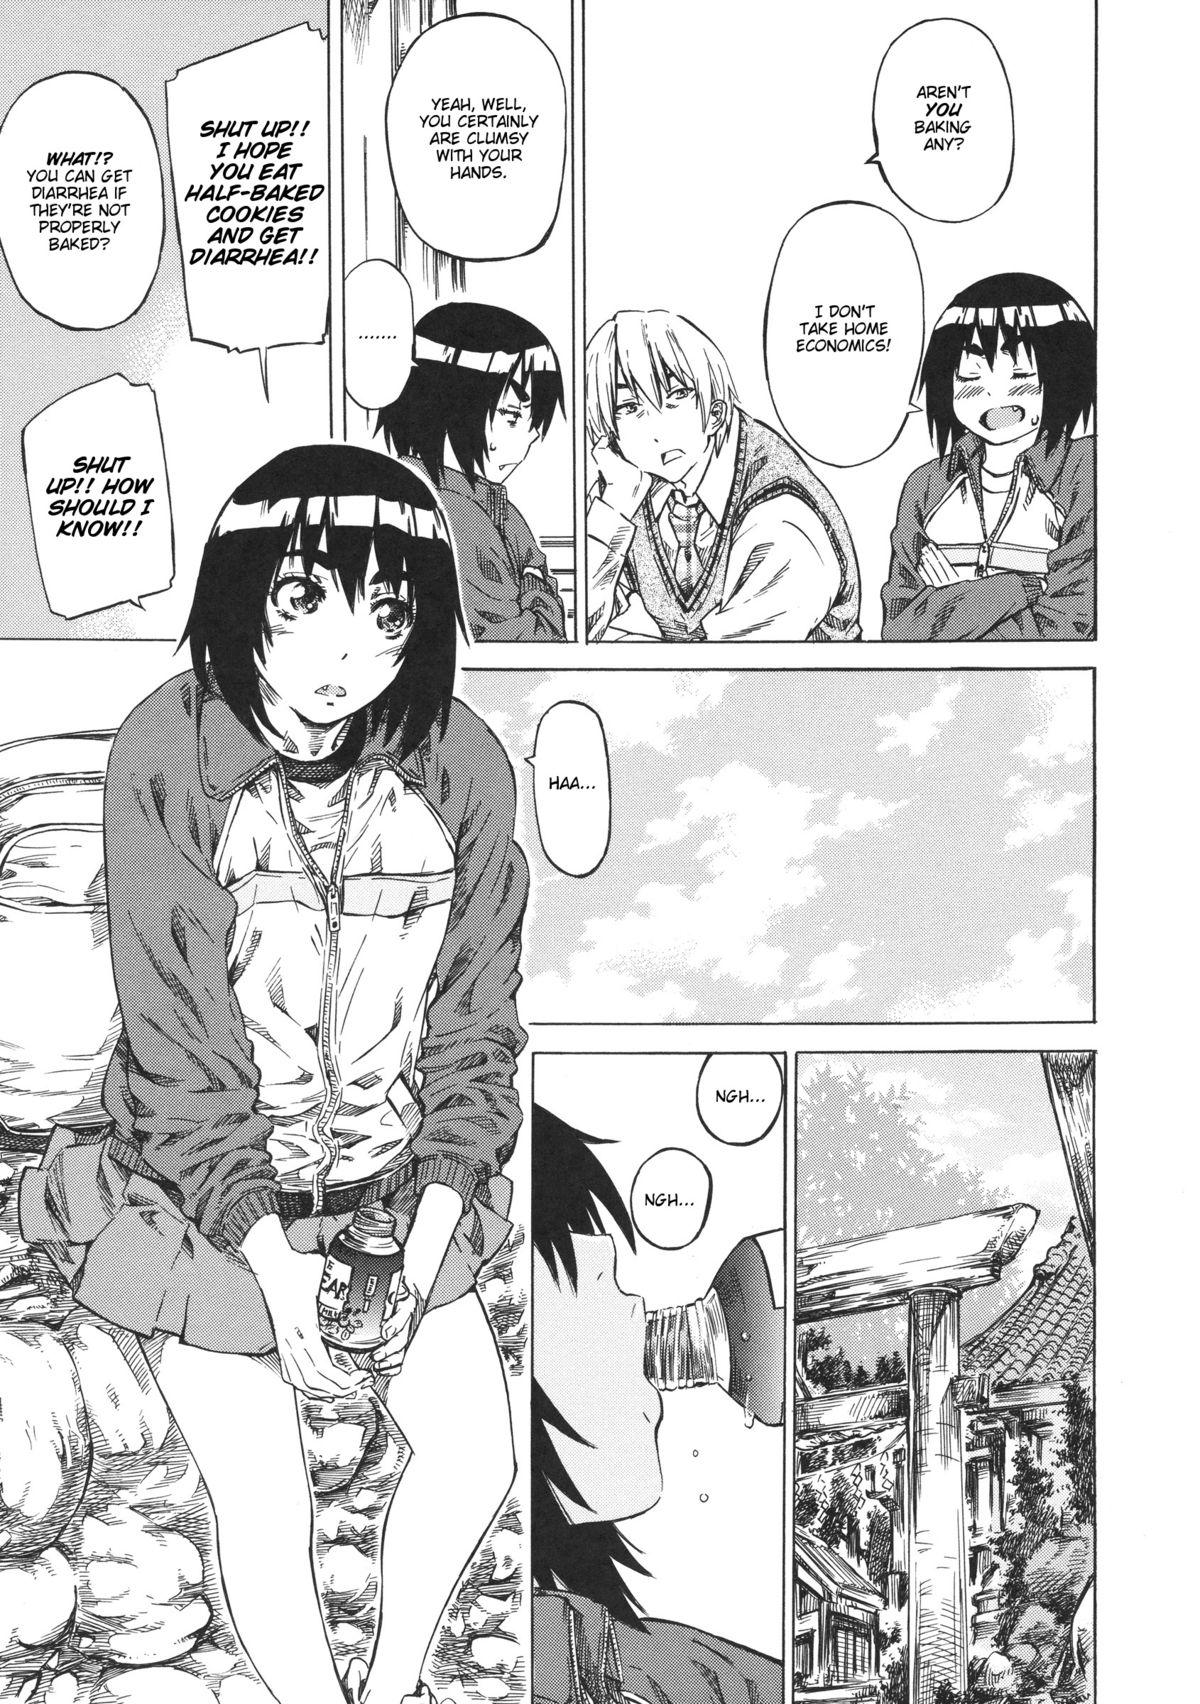 Carro Gogo wa Koucha Yori Kan Koohii De | Canned Coffee is Better than Tea in the Afternoon Super Hot Porn - Page 5